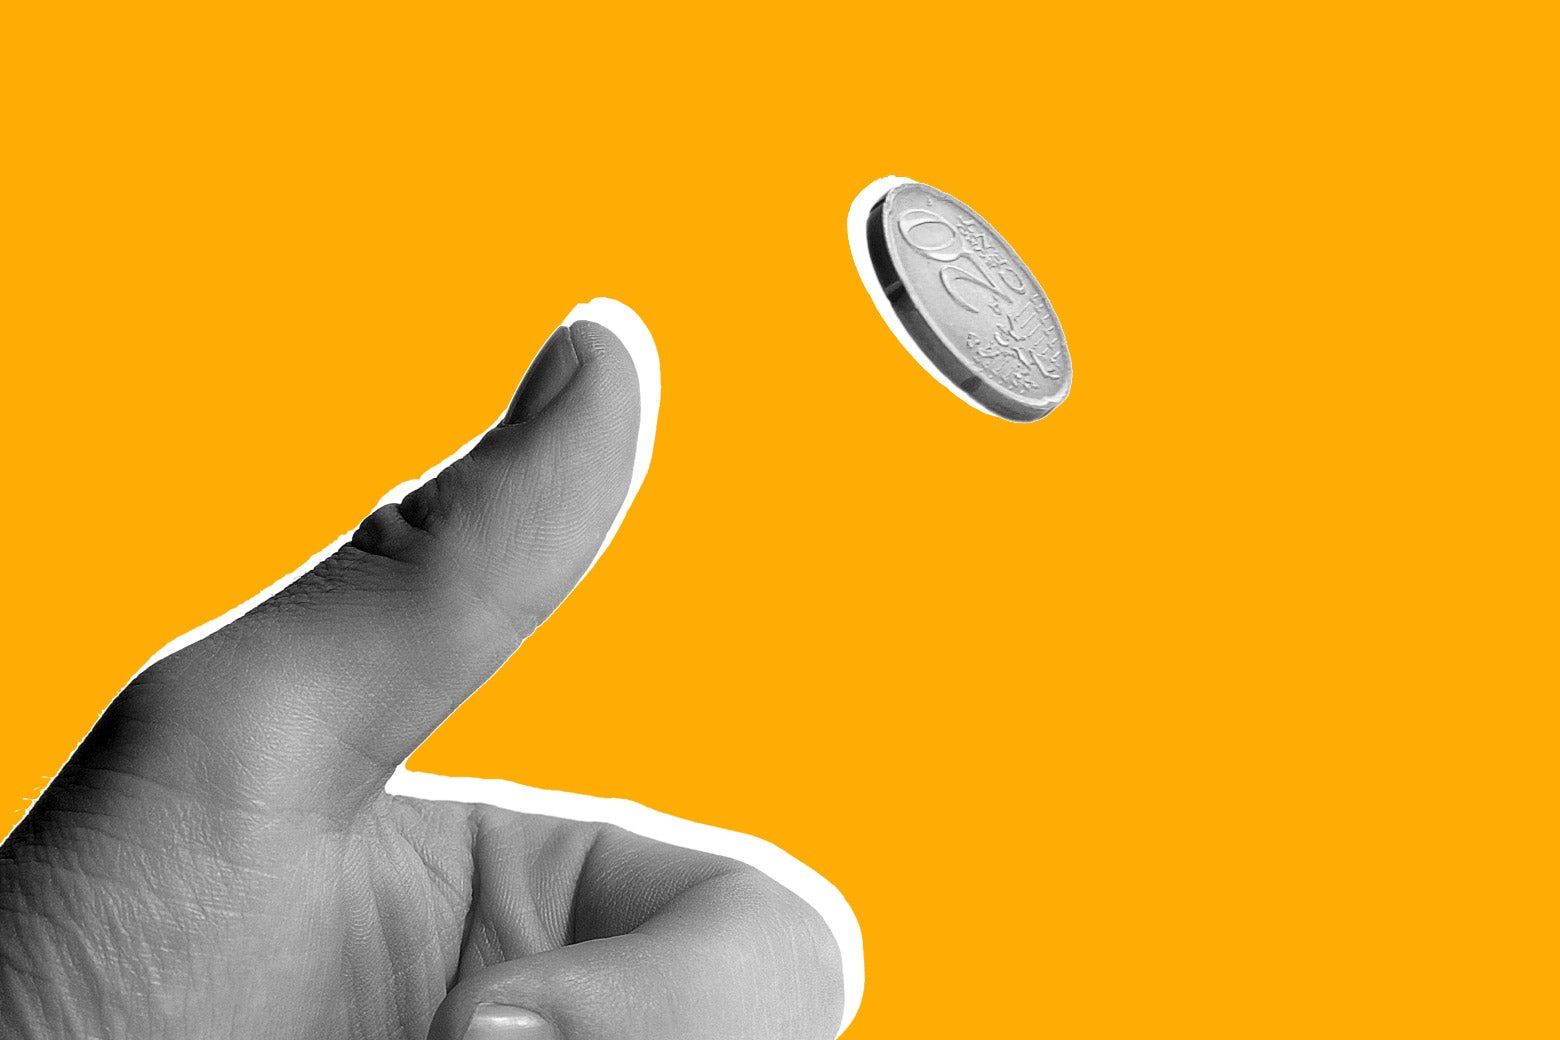 Hand flipping a coin.